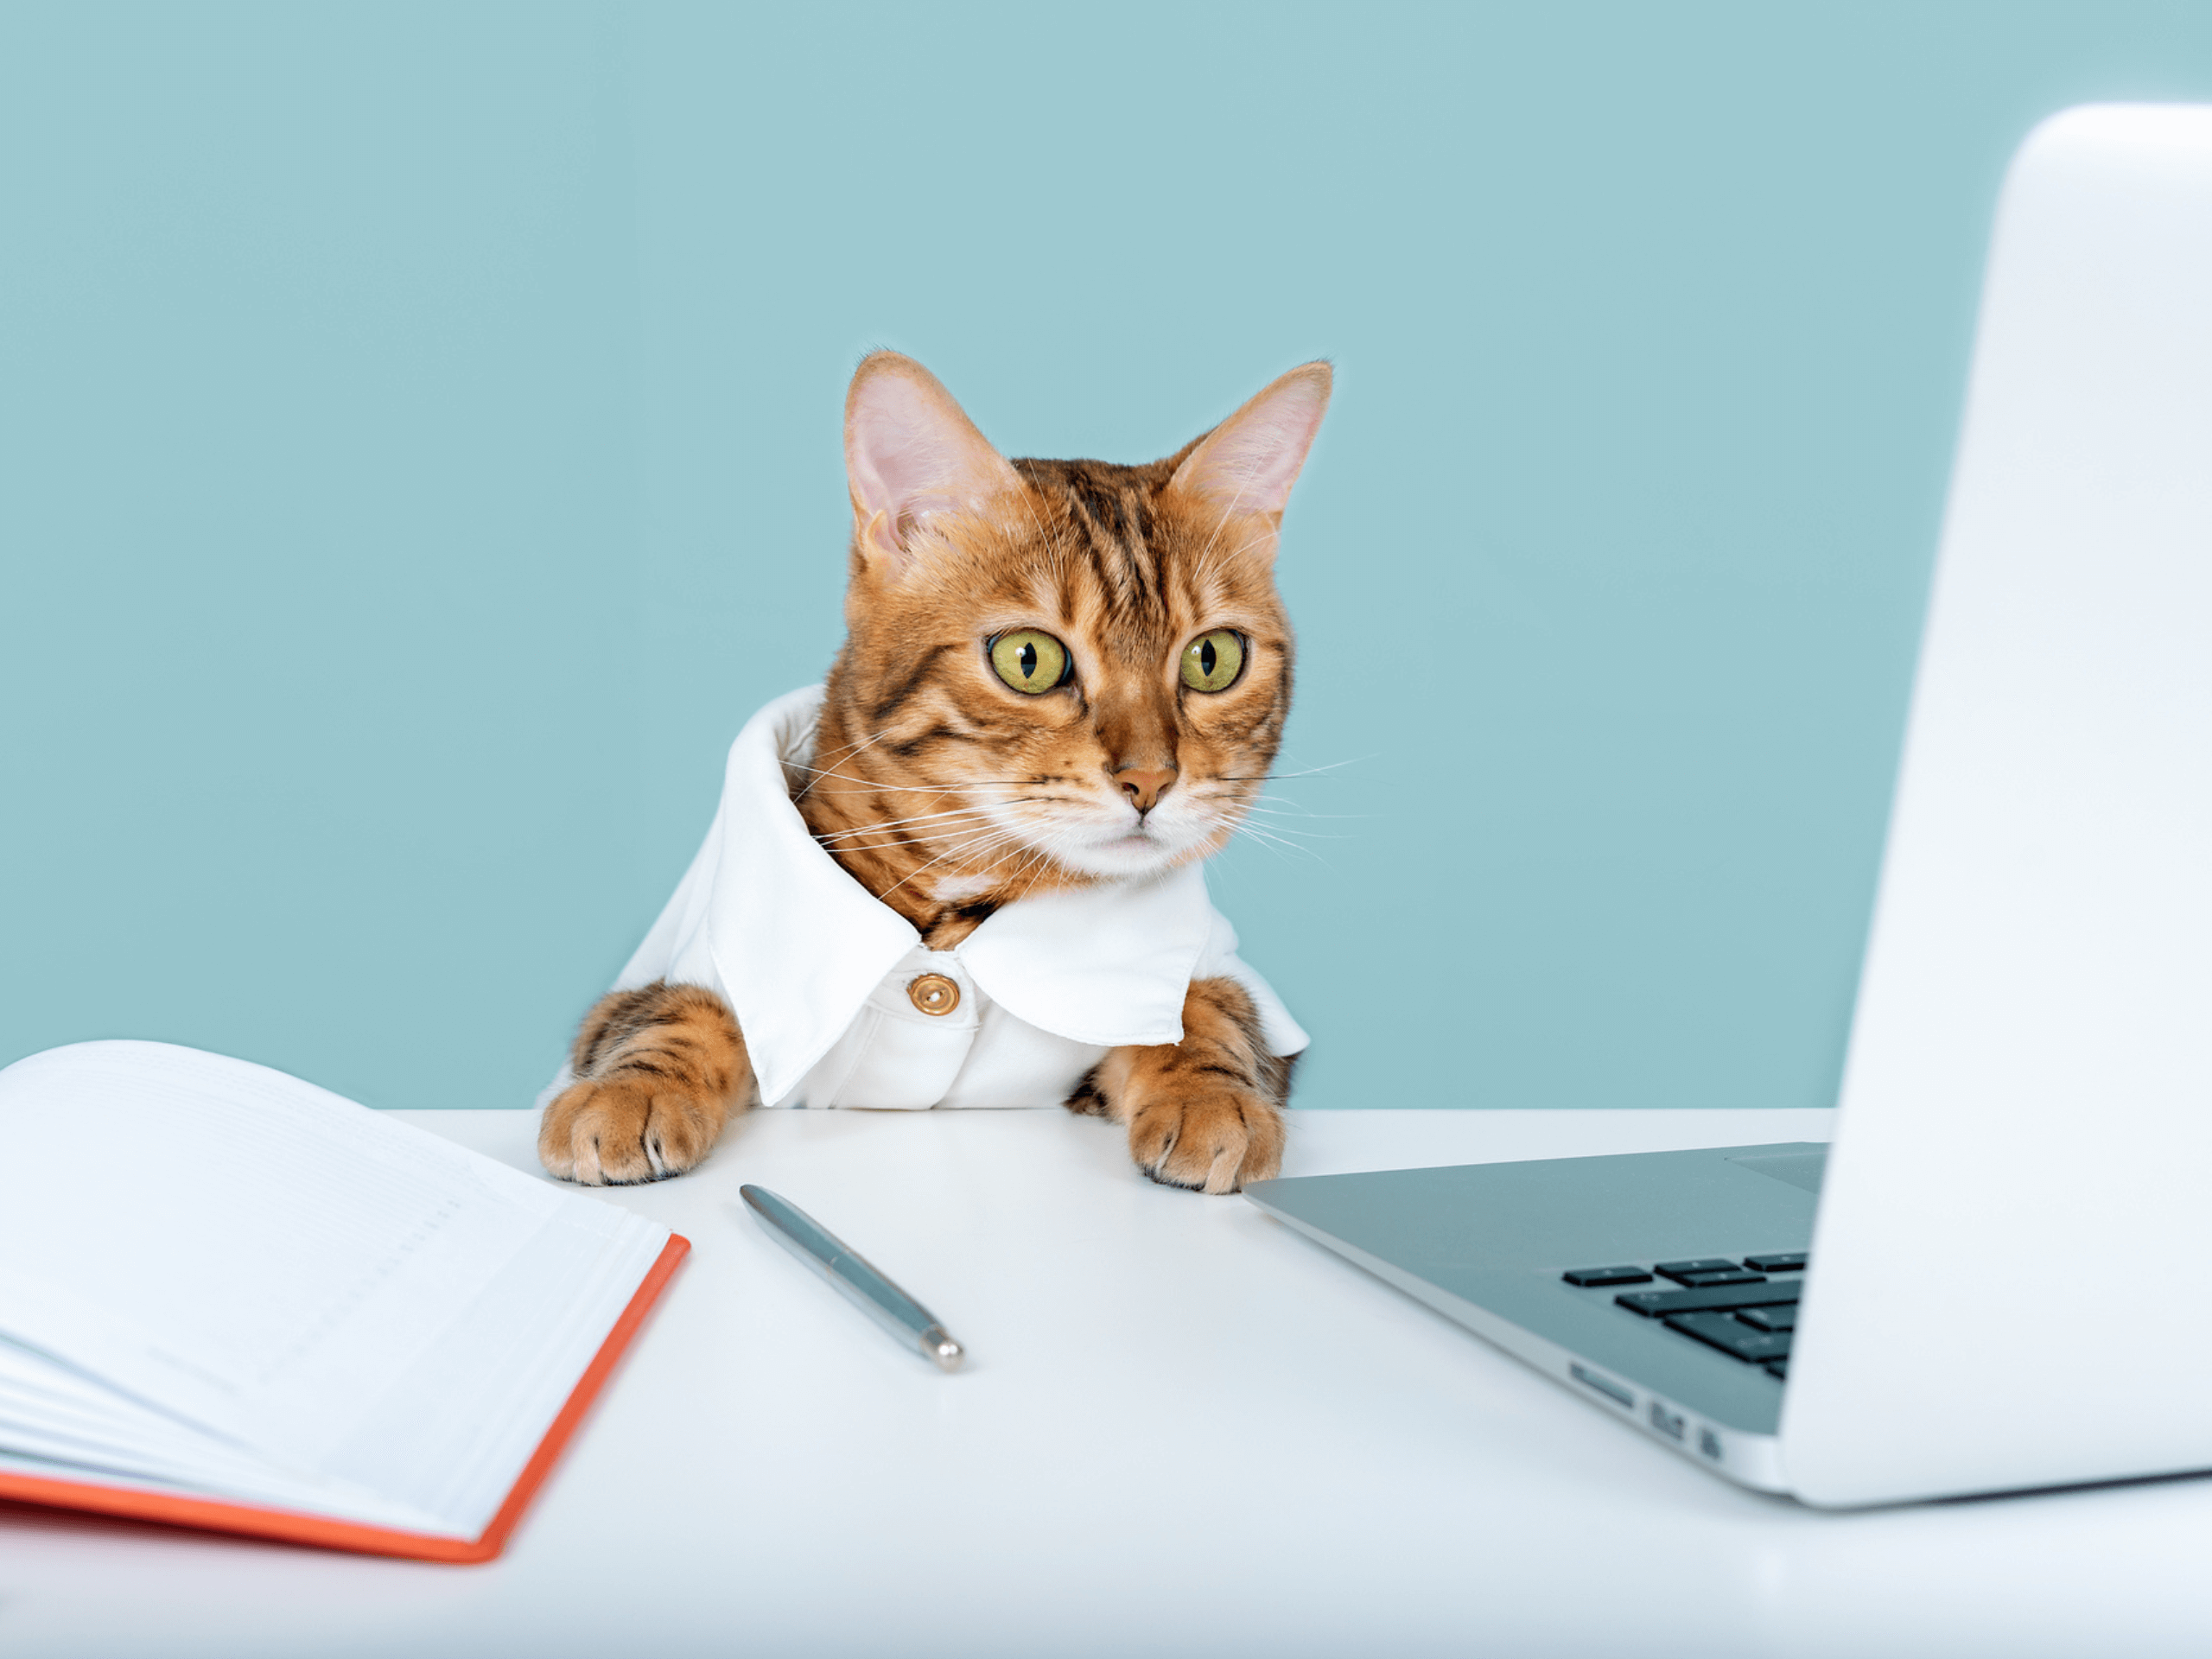 cat looking at laptop screen as they try to fix punctuation mistakes